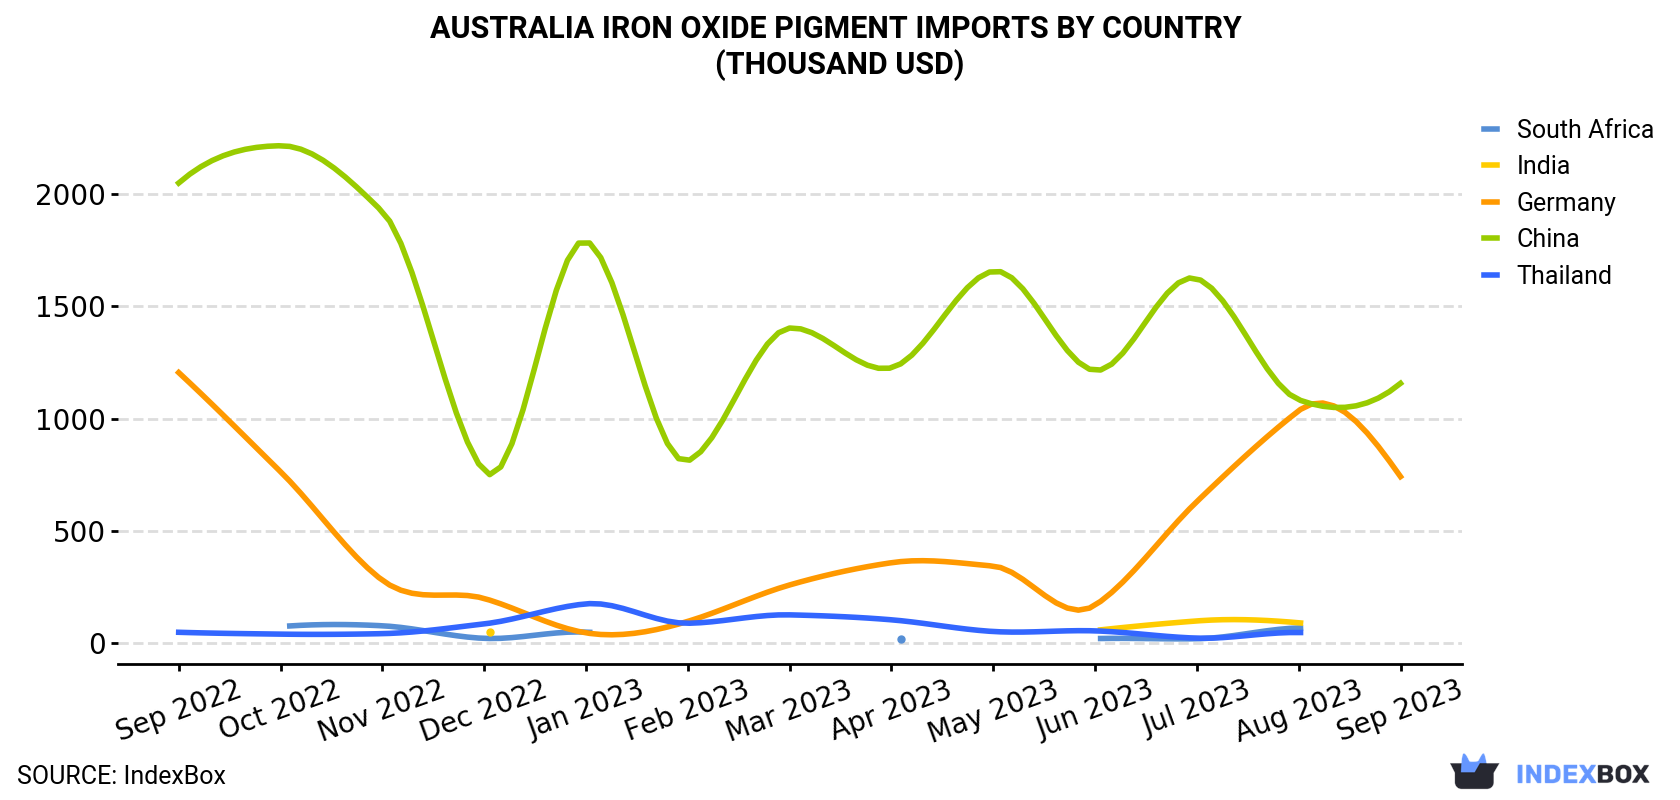 Australia Iron Oxide Pigment Imports By Country (Thousand USD)